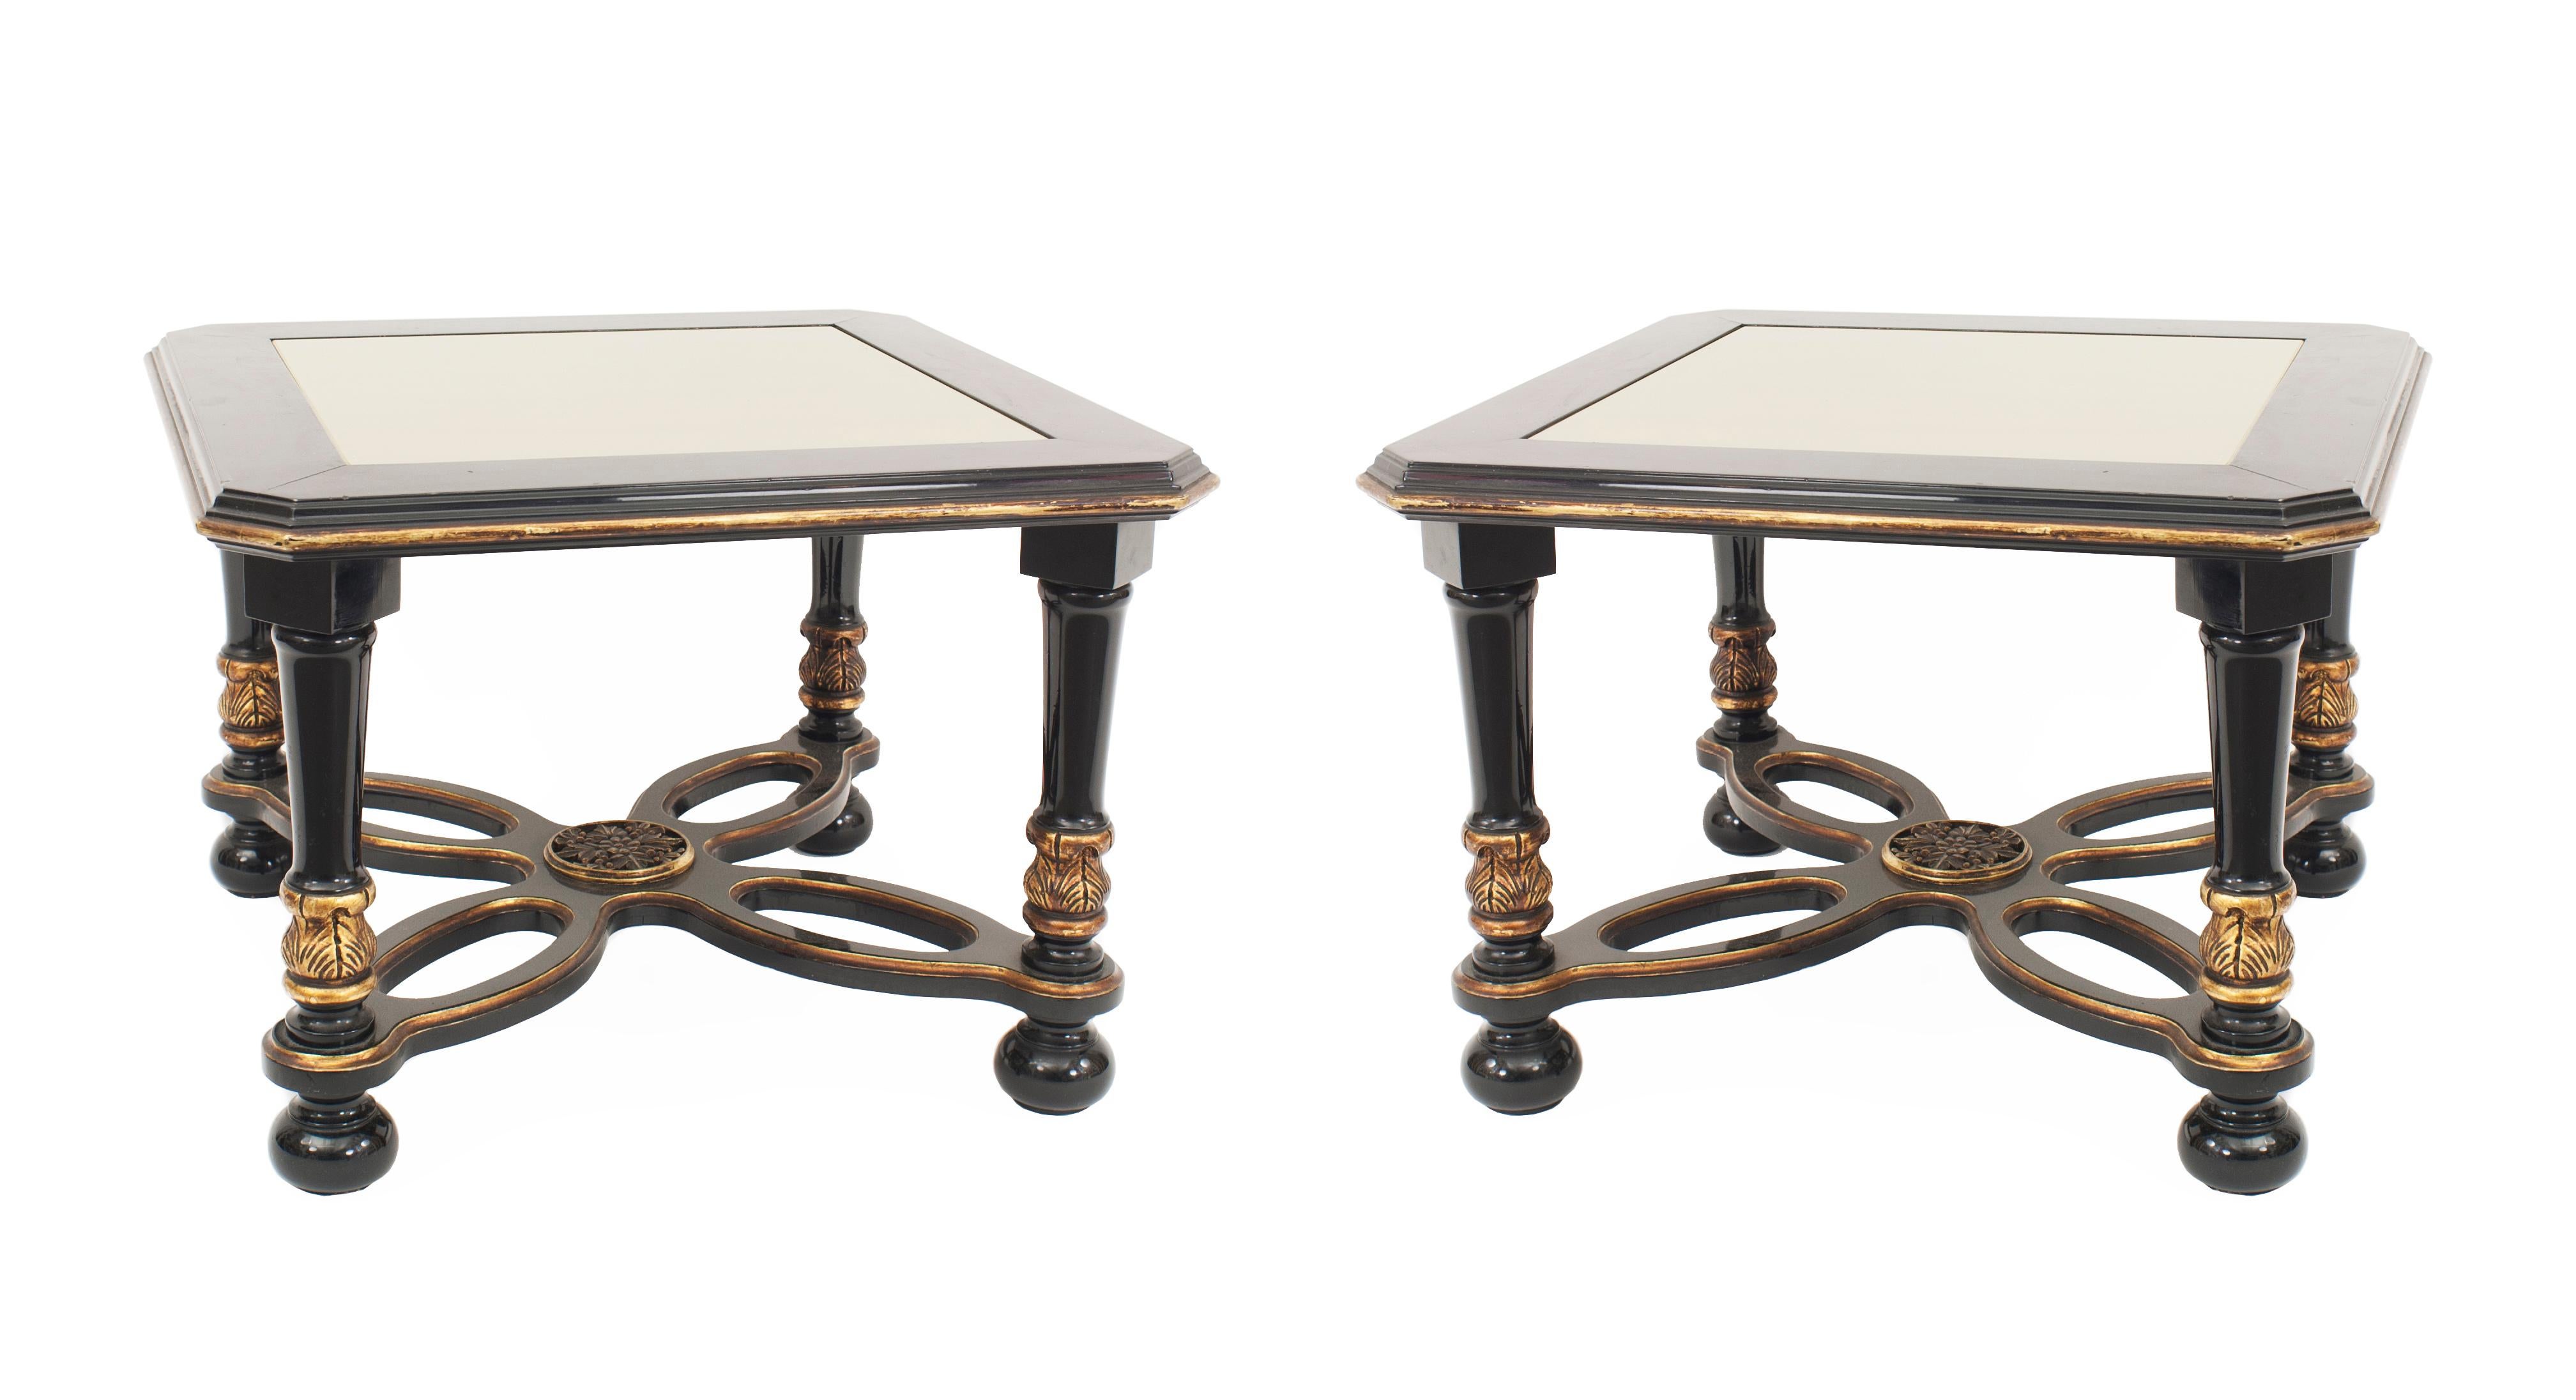 Pair of French Mid-Century (1940s) ebonized low end tables with an inset gold glass top and gilt trim with an open design stretcher (Attributed to MAISON JANSEN) (PRICED AS Pair)
